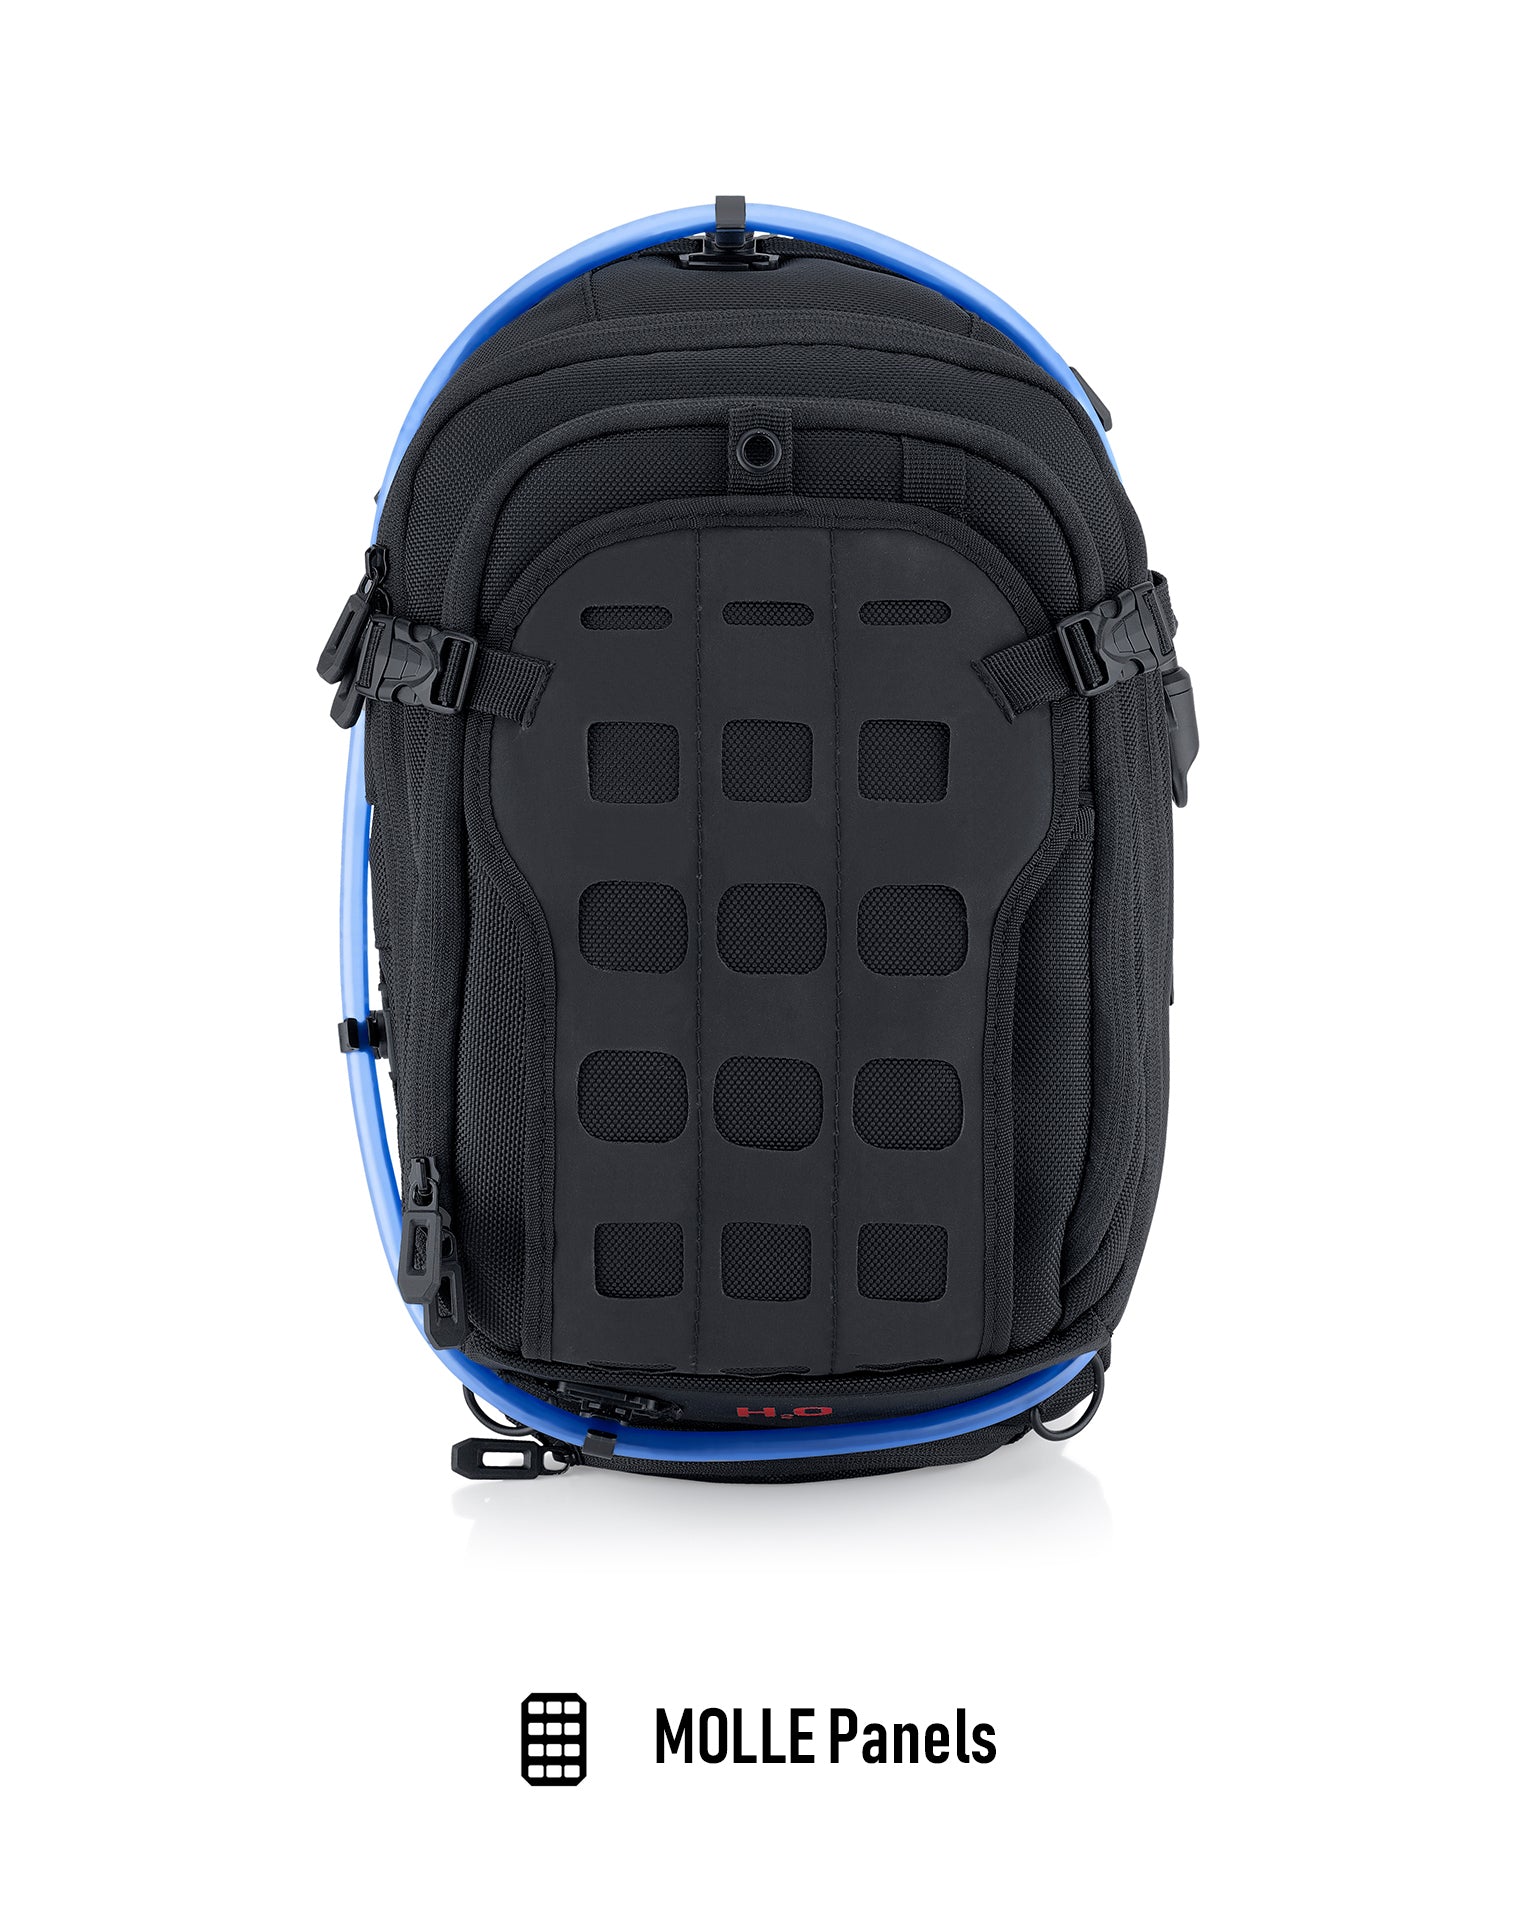 Viking Apex KTM ADV Touring Backpack with Hydration Pack